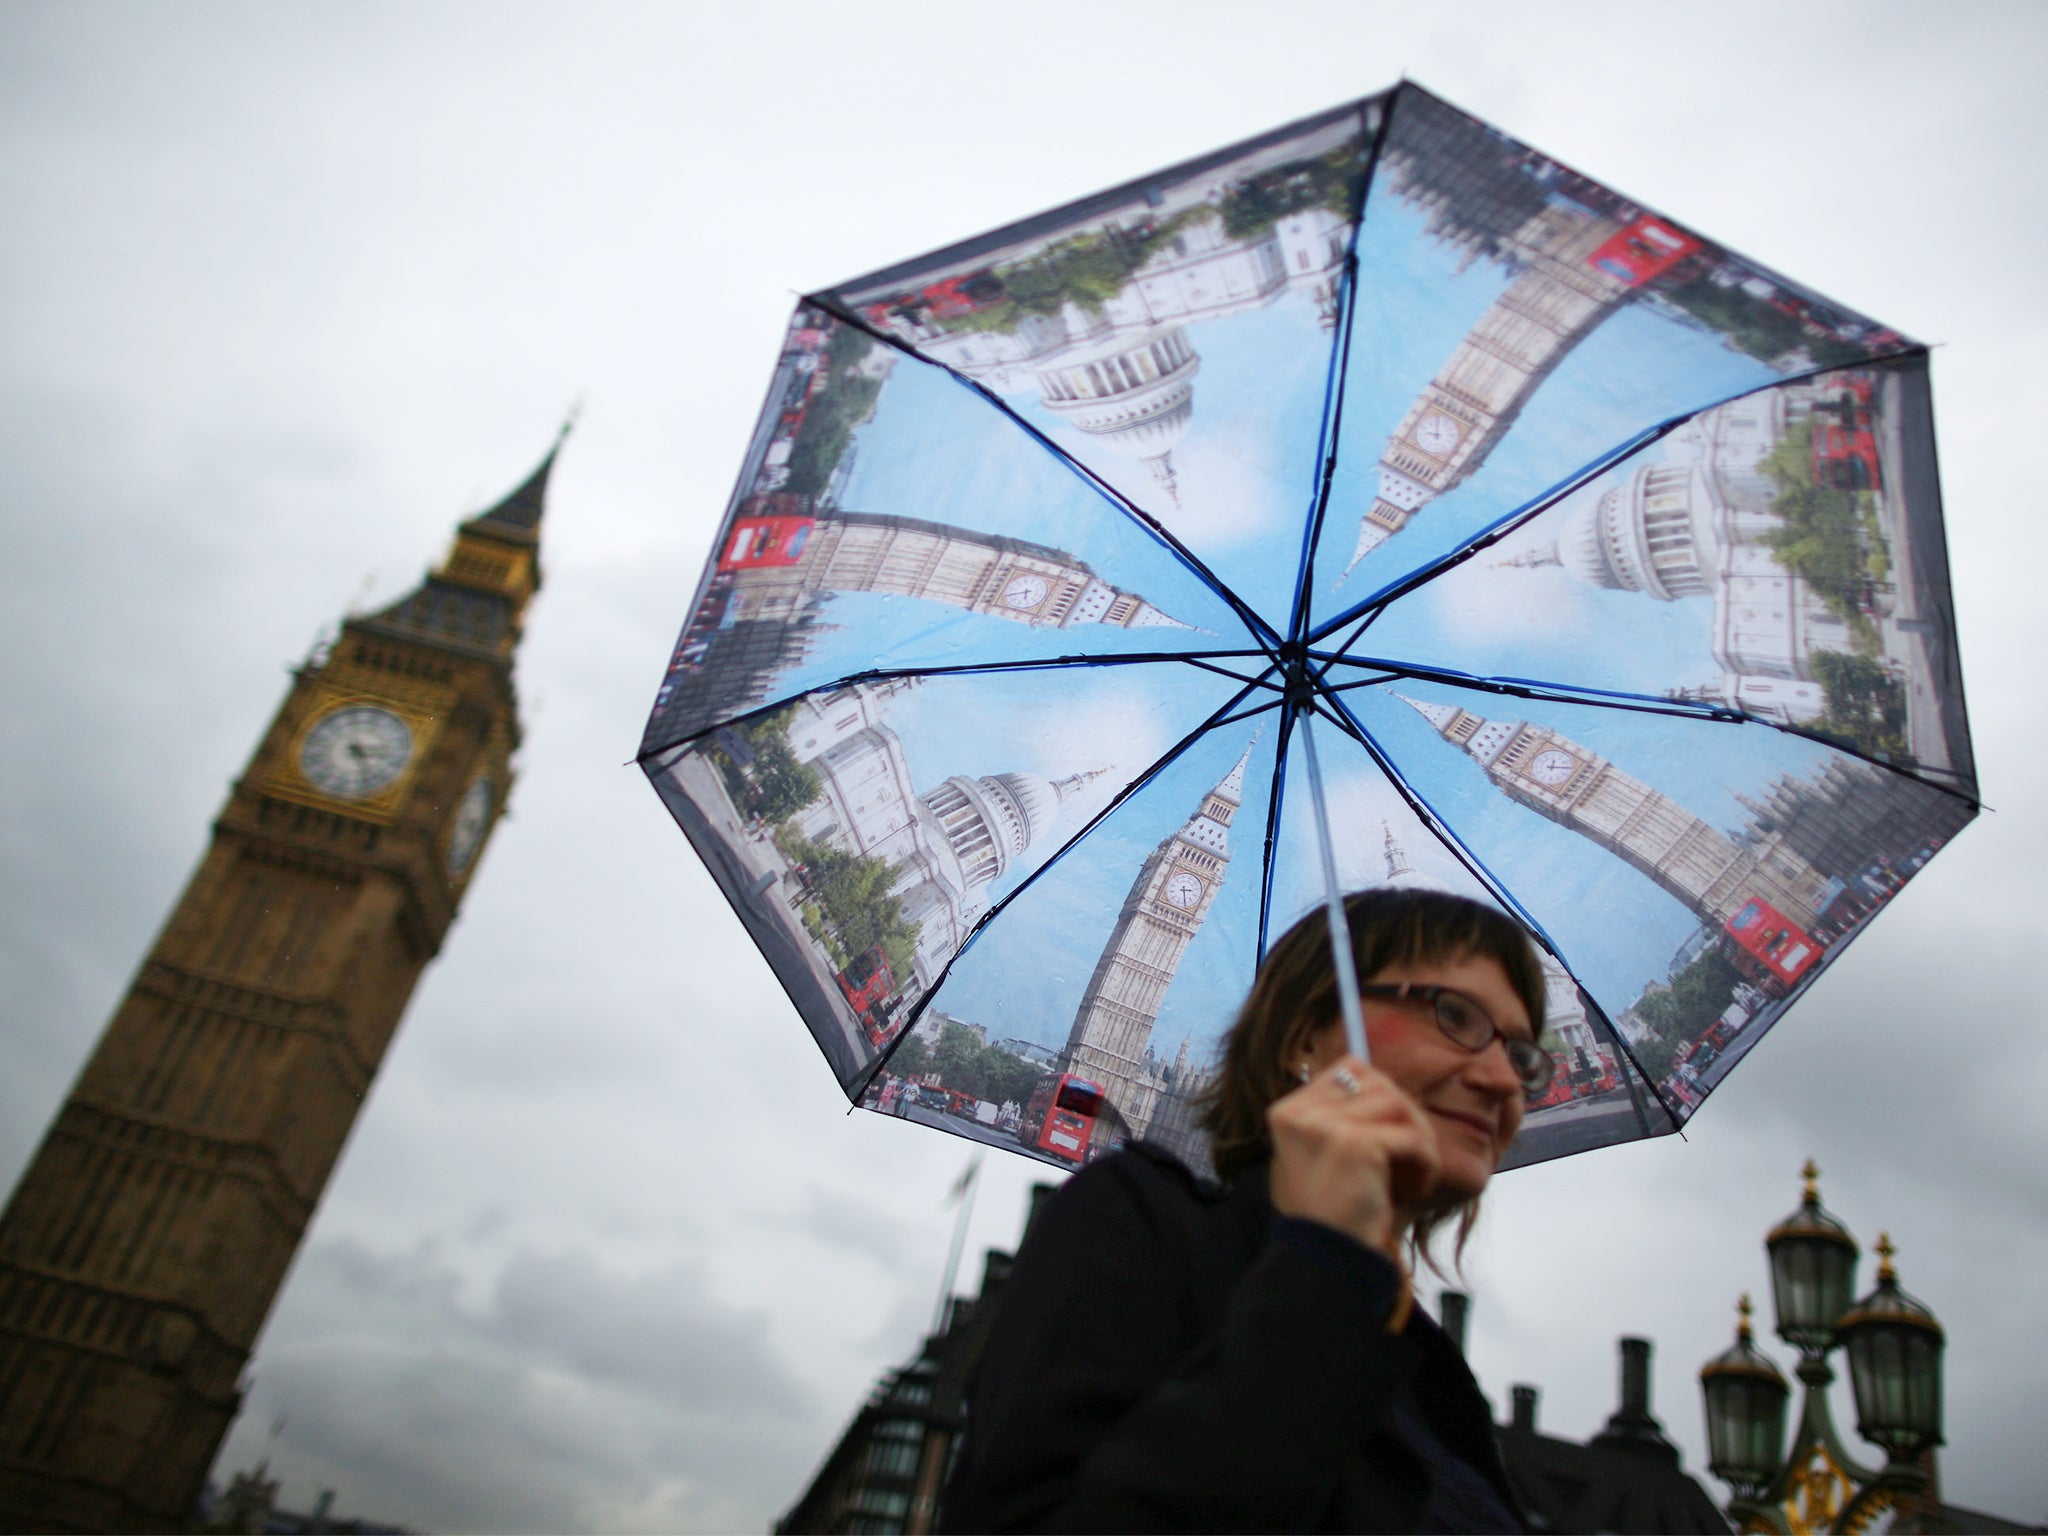 A visitor shelters from the rain under an umbrella decorated with images of Big Ben and St Paul's as she walks near Parliament in London. Downpours are being experienced in parts of the United Kingdom